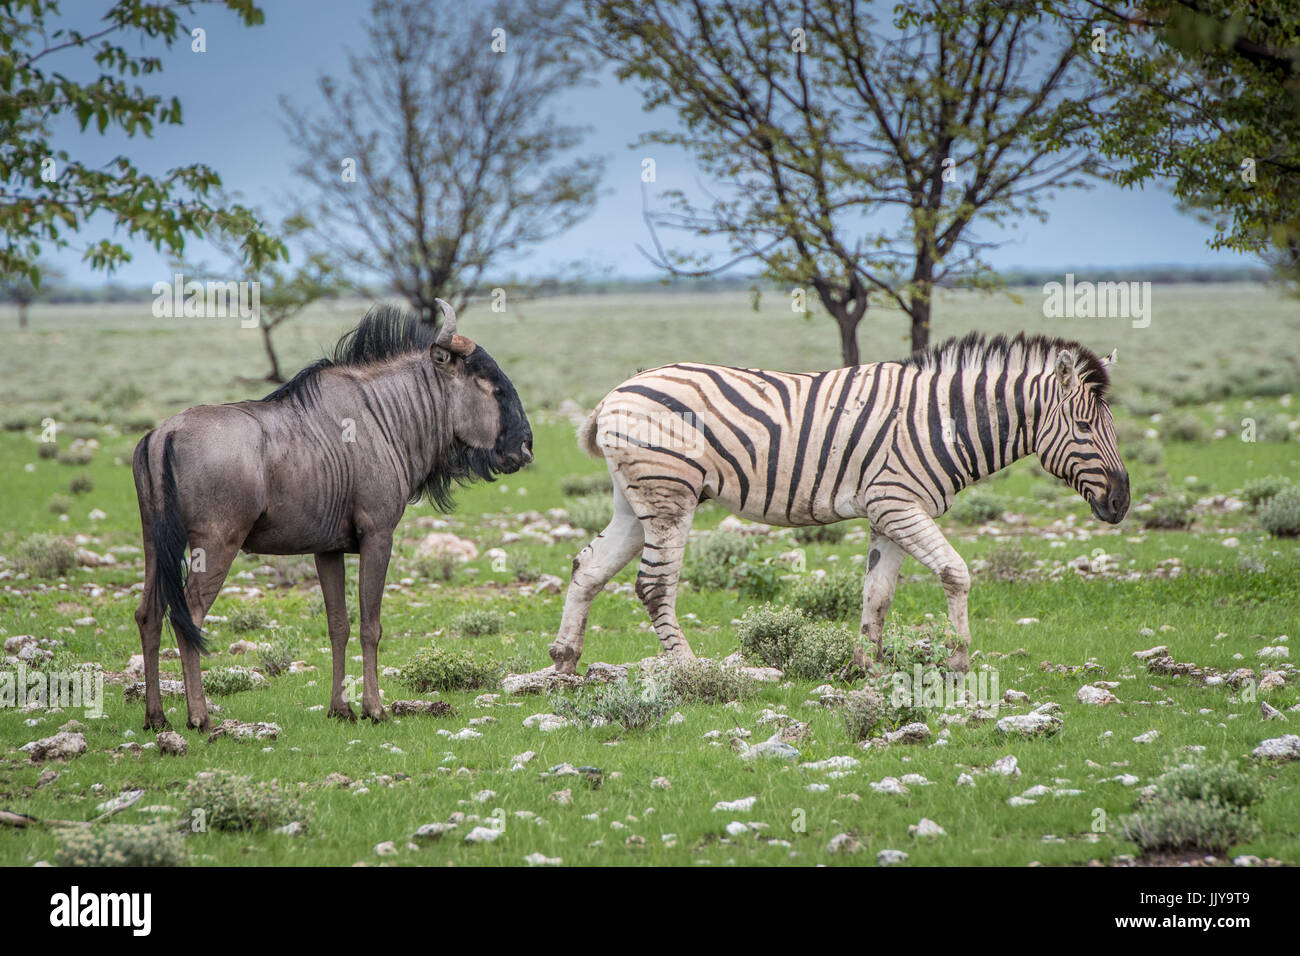 Blue wildebeest and zebra graze and roam together at Etosha National Park in Namibia, Africa. Stock Photo